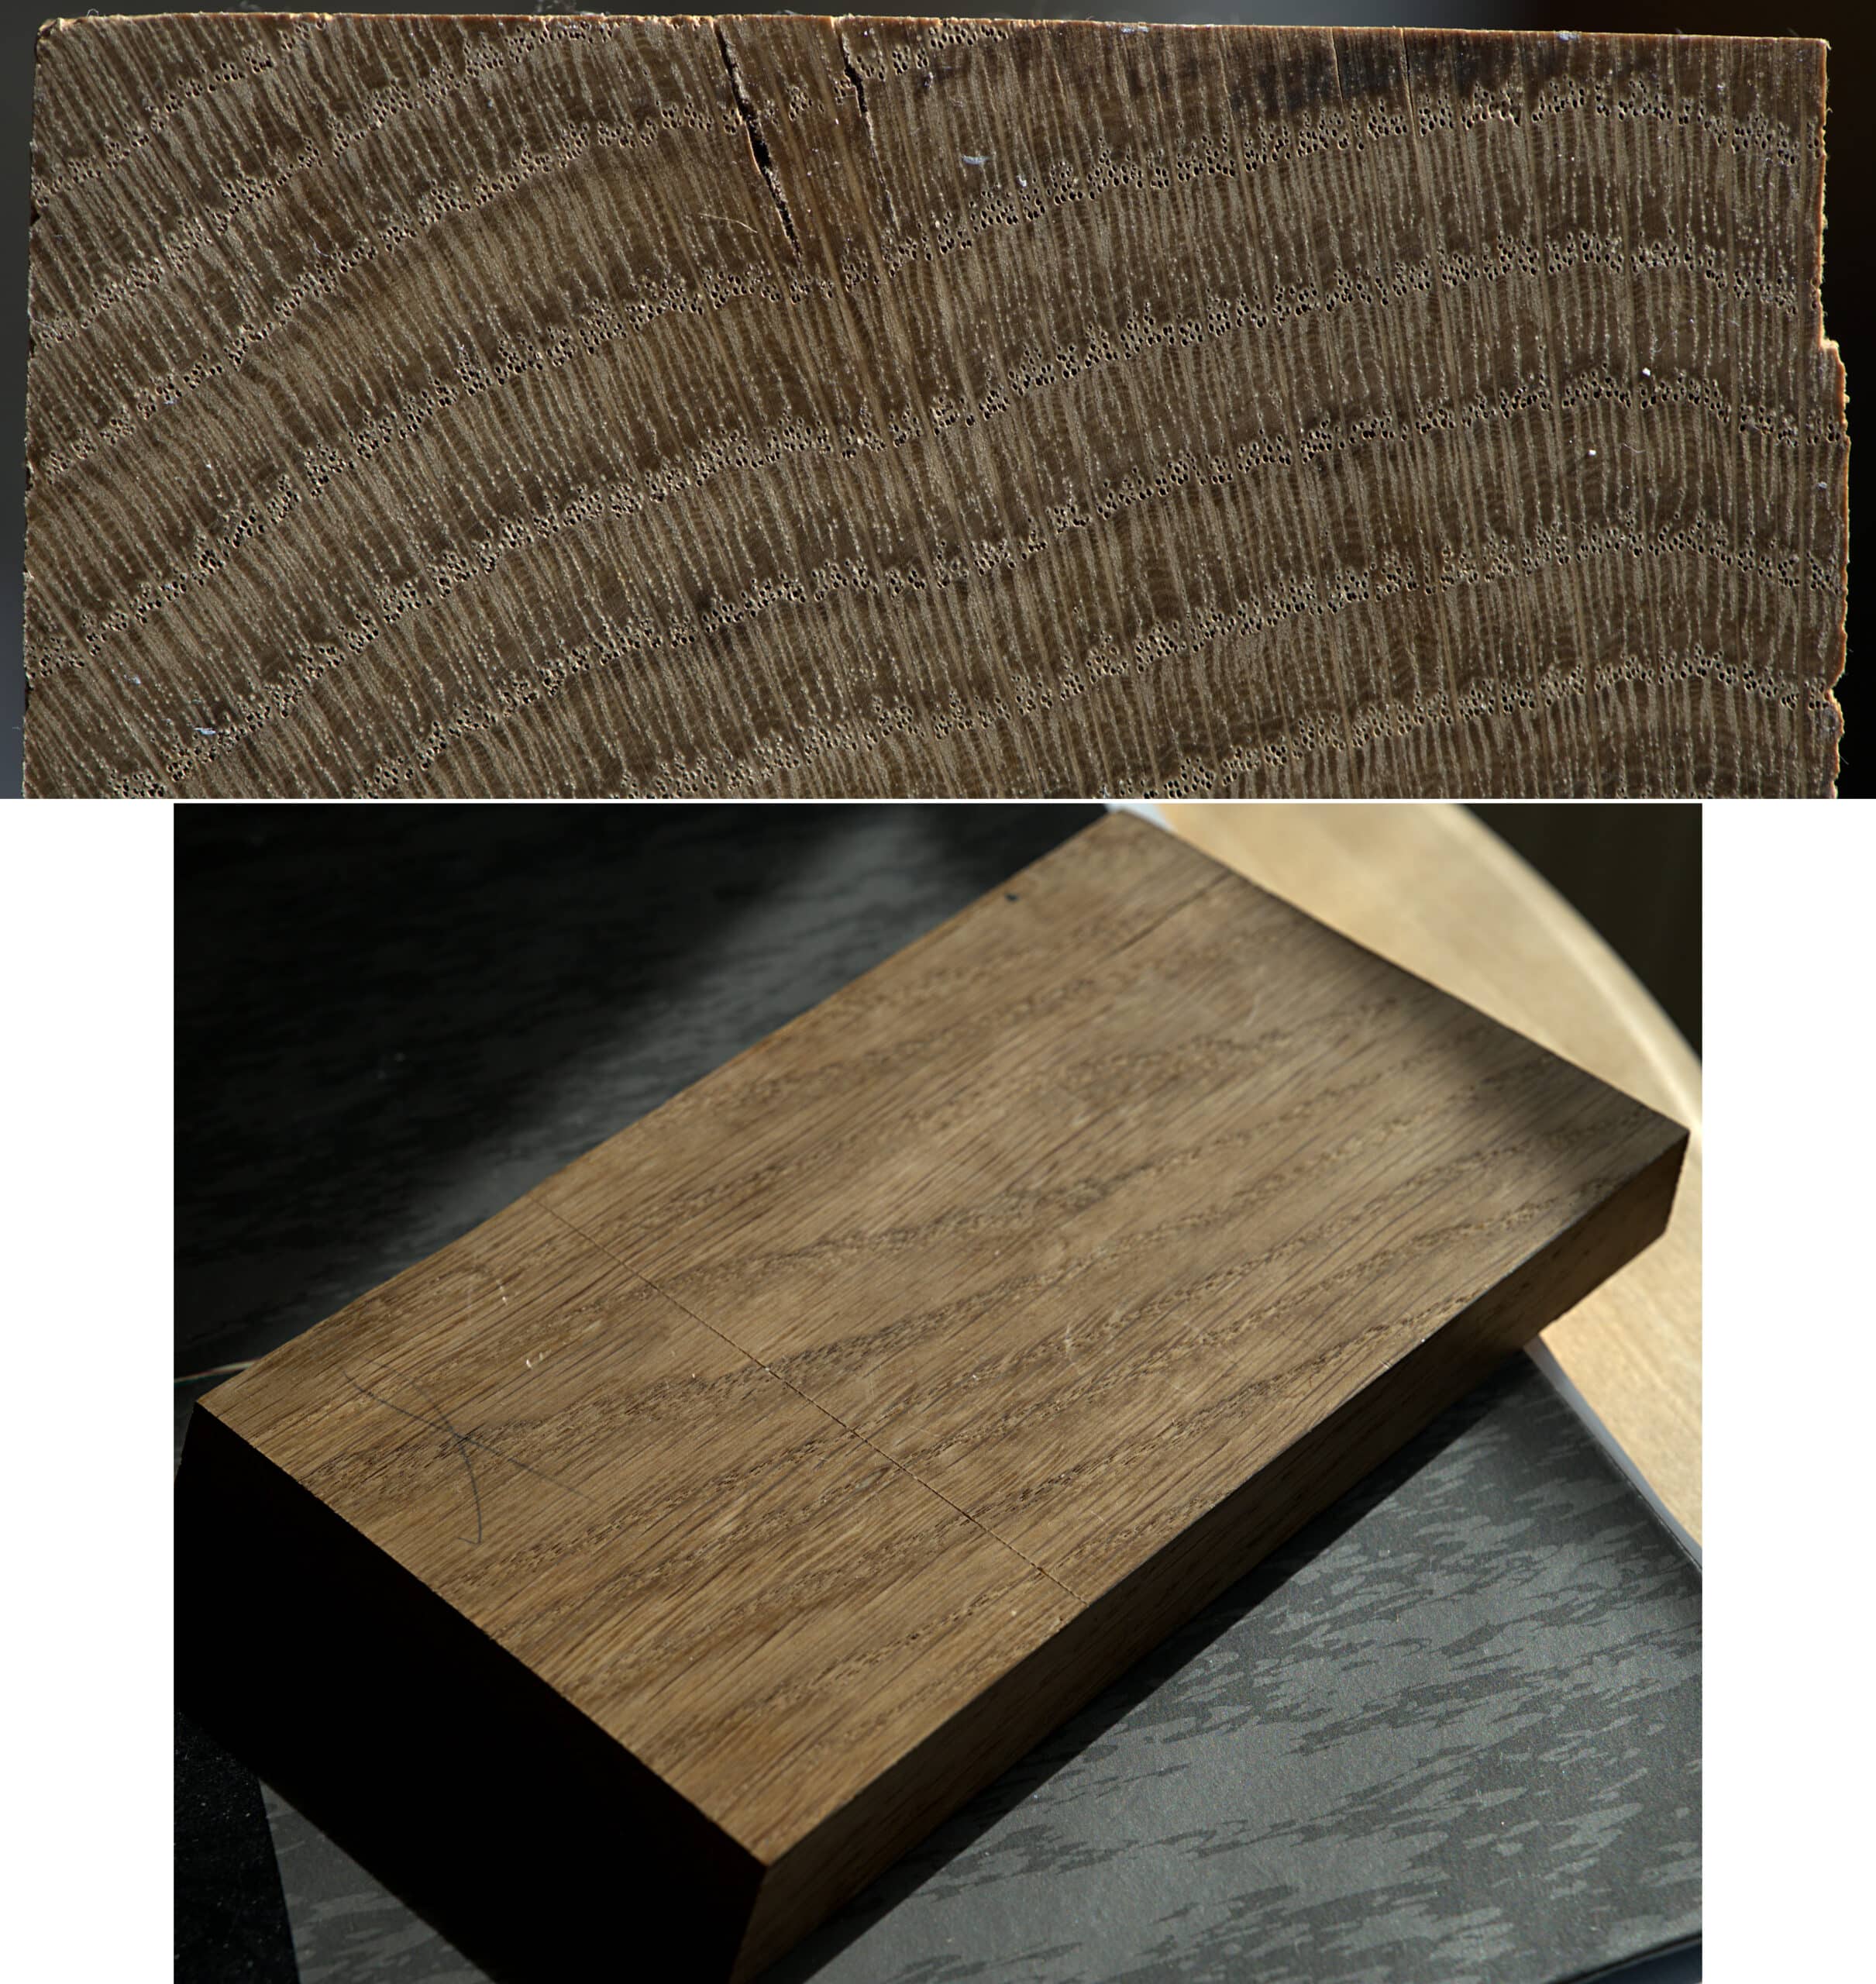 White Oak end grain and tangential face